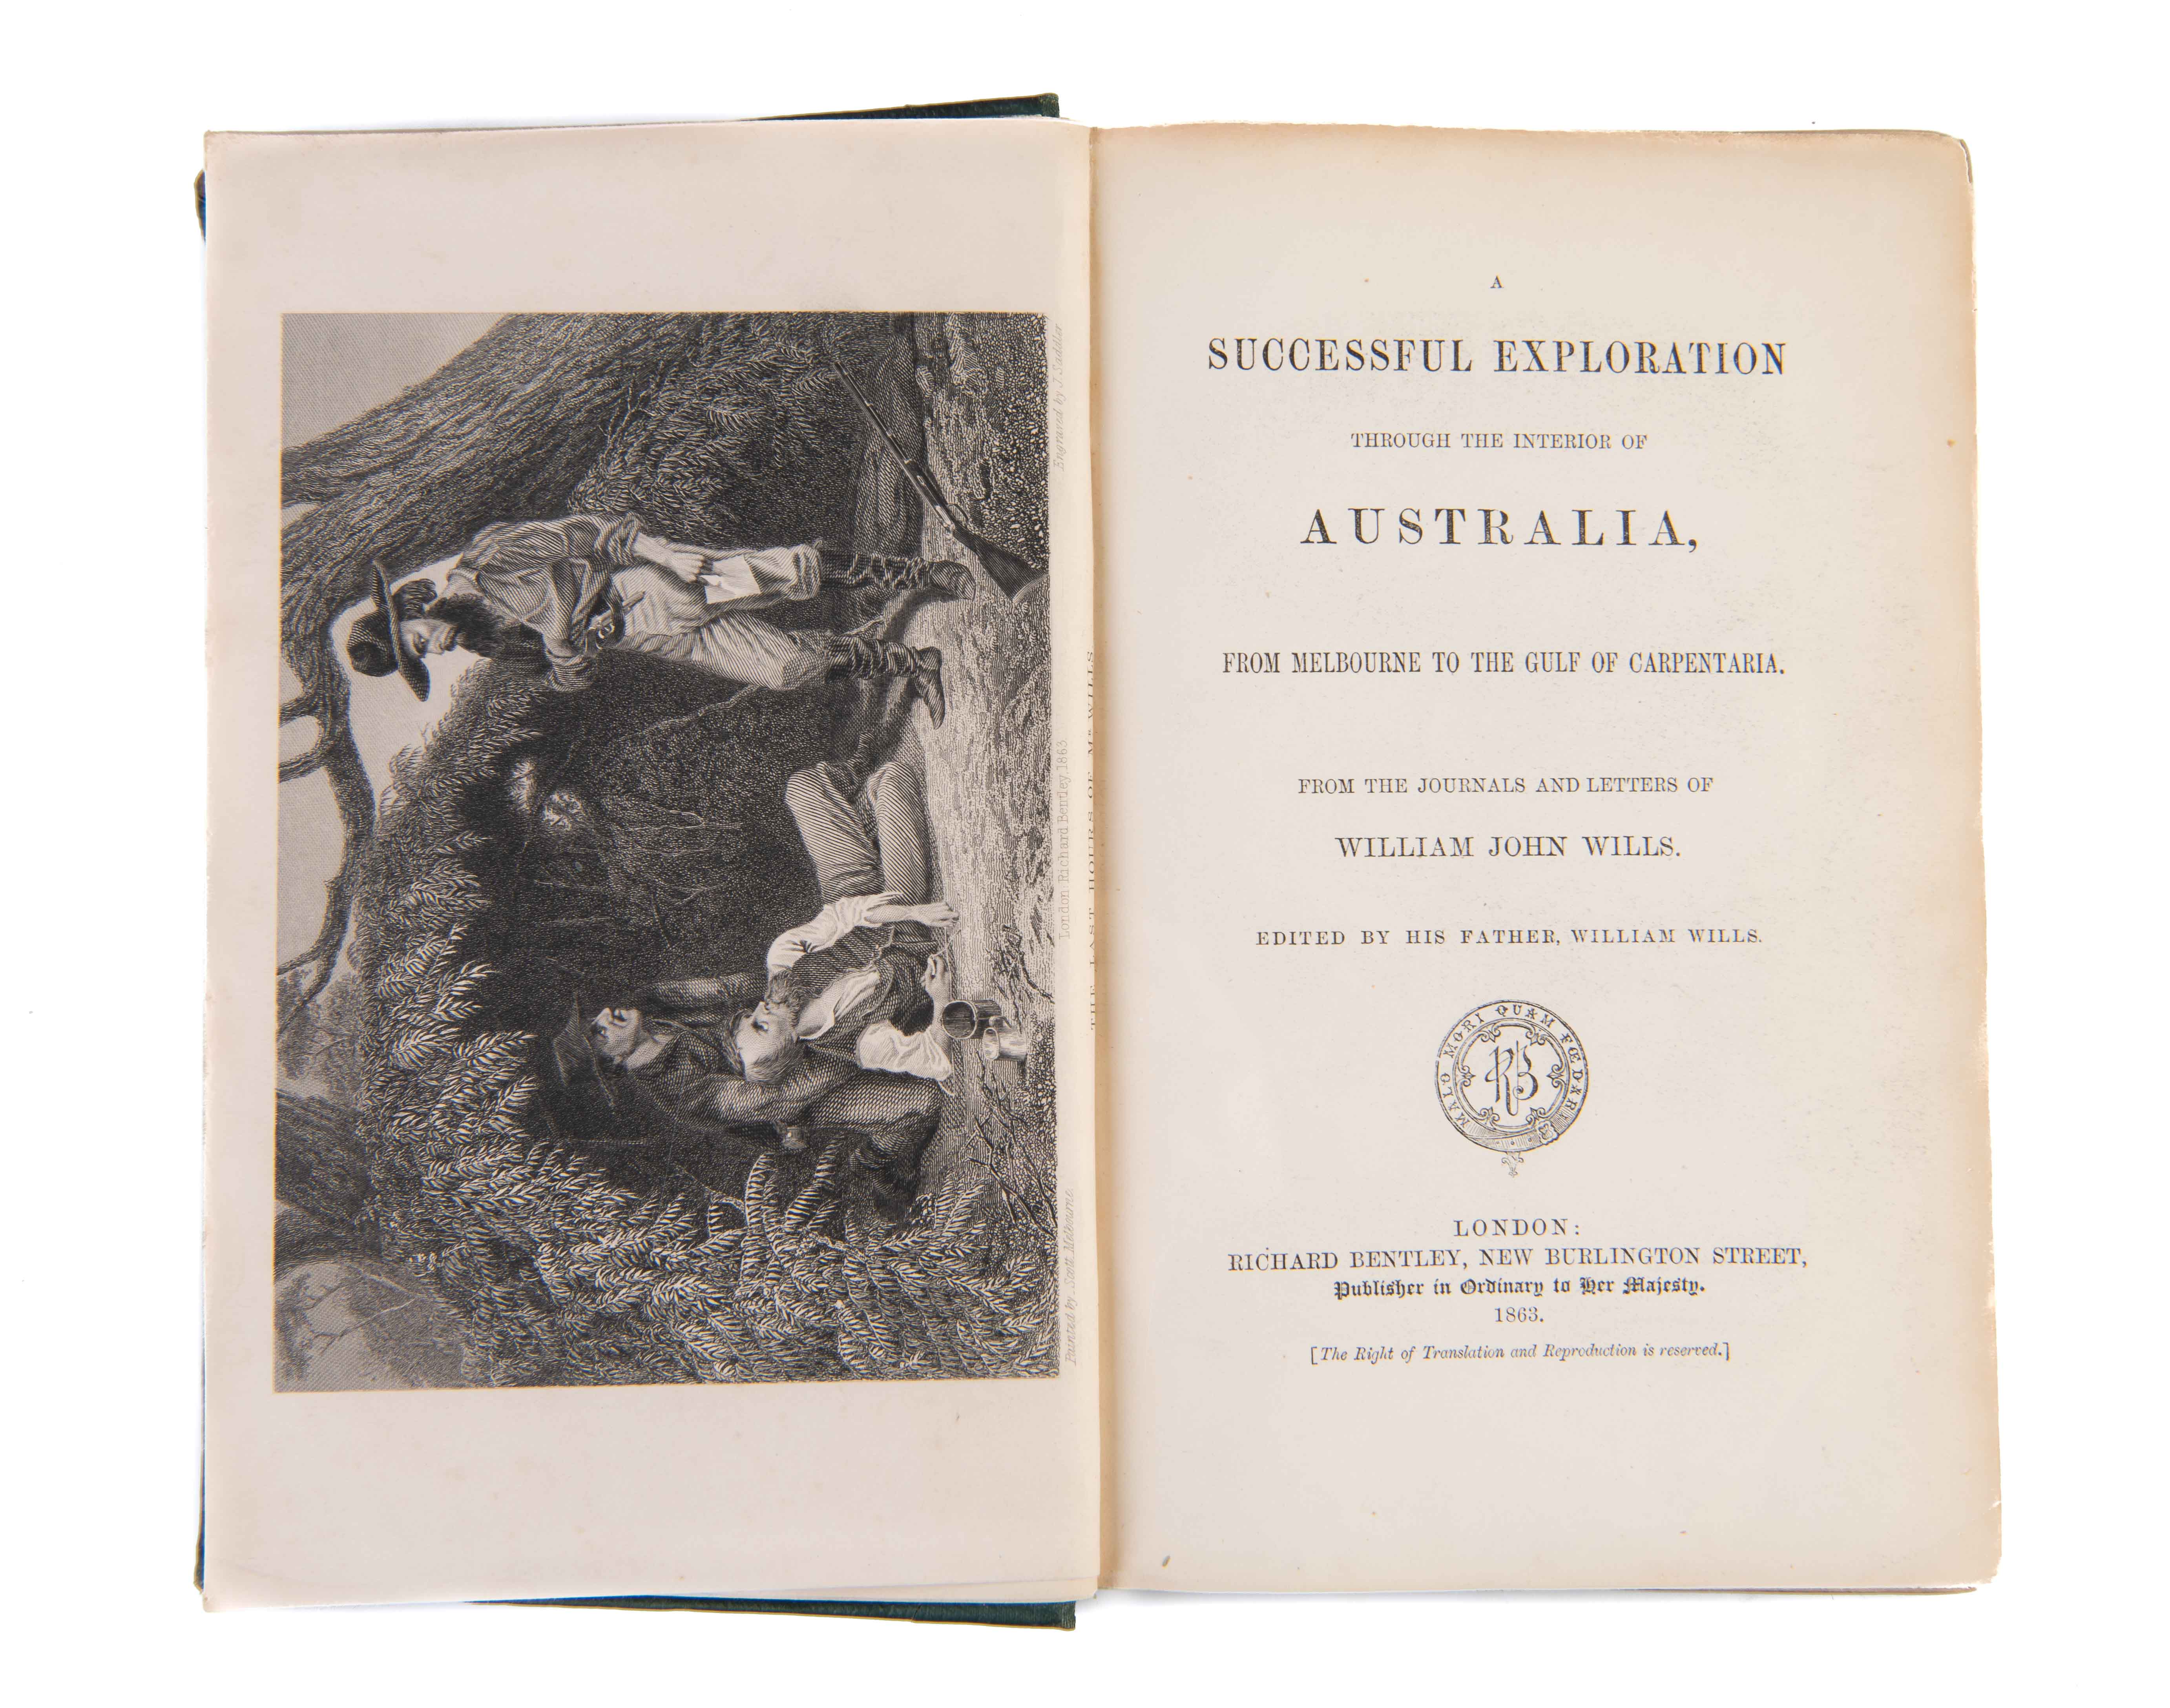 Carpentaria.　Of　Letters　First　A　William　Of　Of　Exploration　Australia,From　Wills.　The　Melbourne　John　From　William　Gulf　To　The　WILLS　Interior　Journals　Edition　The　Through　Successful　And